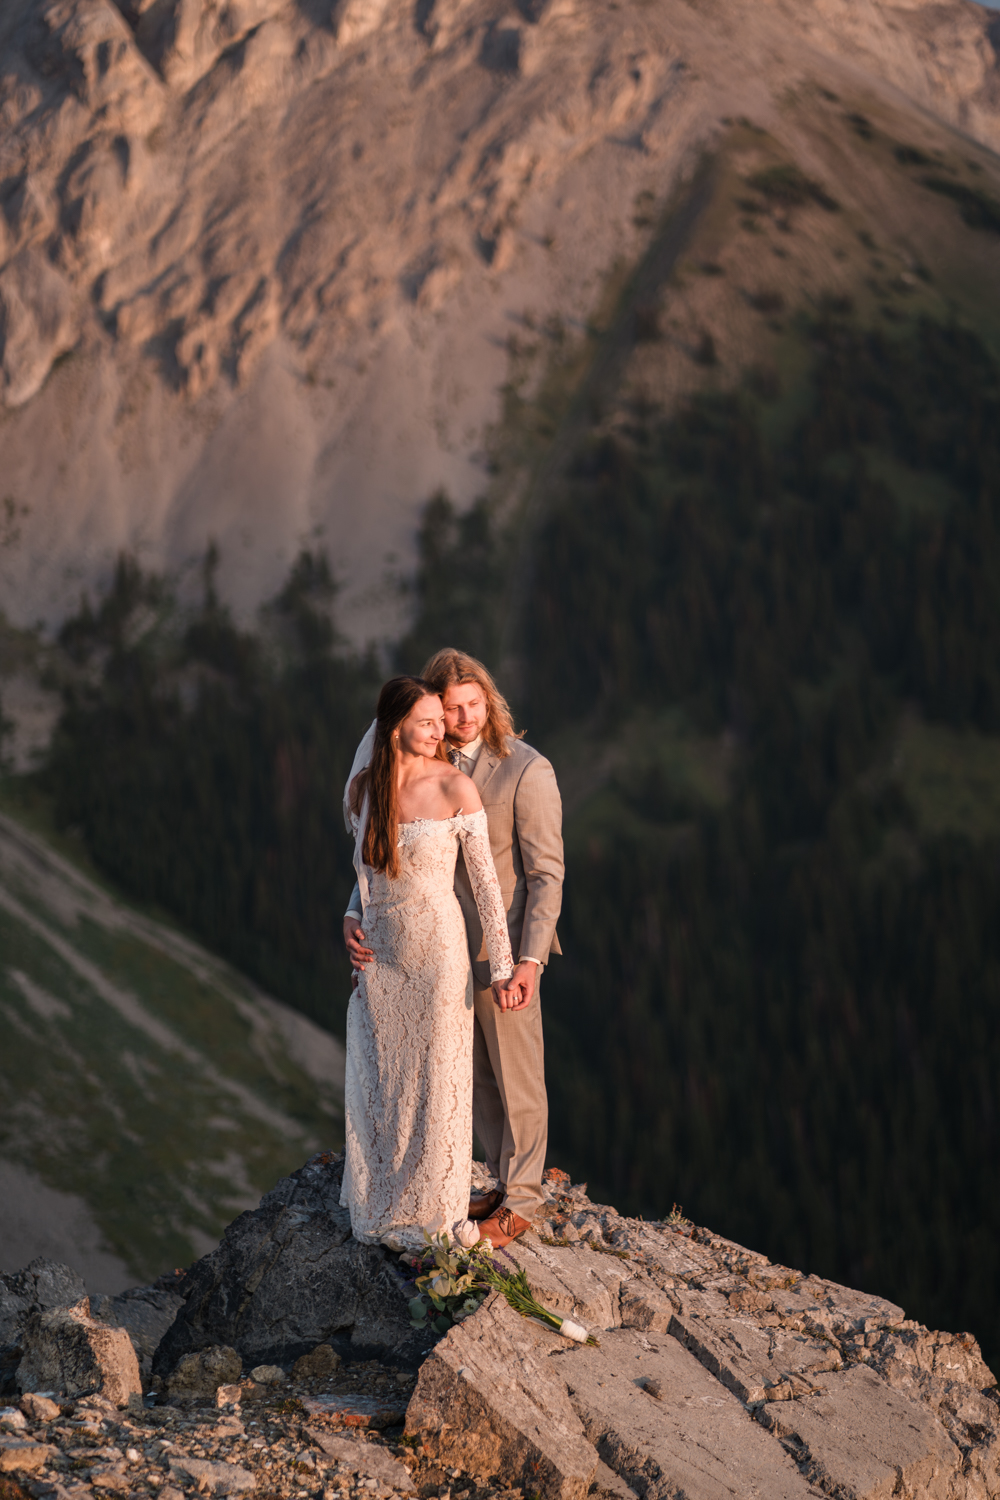 A breathtaking sunrise during an intimate backcountry camping elopement in Alberta's Kananaskis region